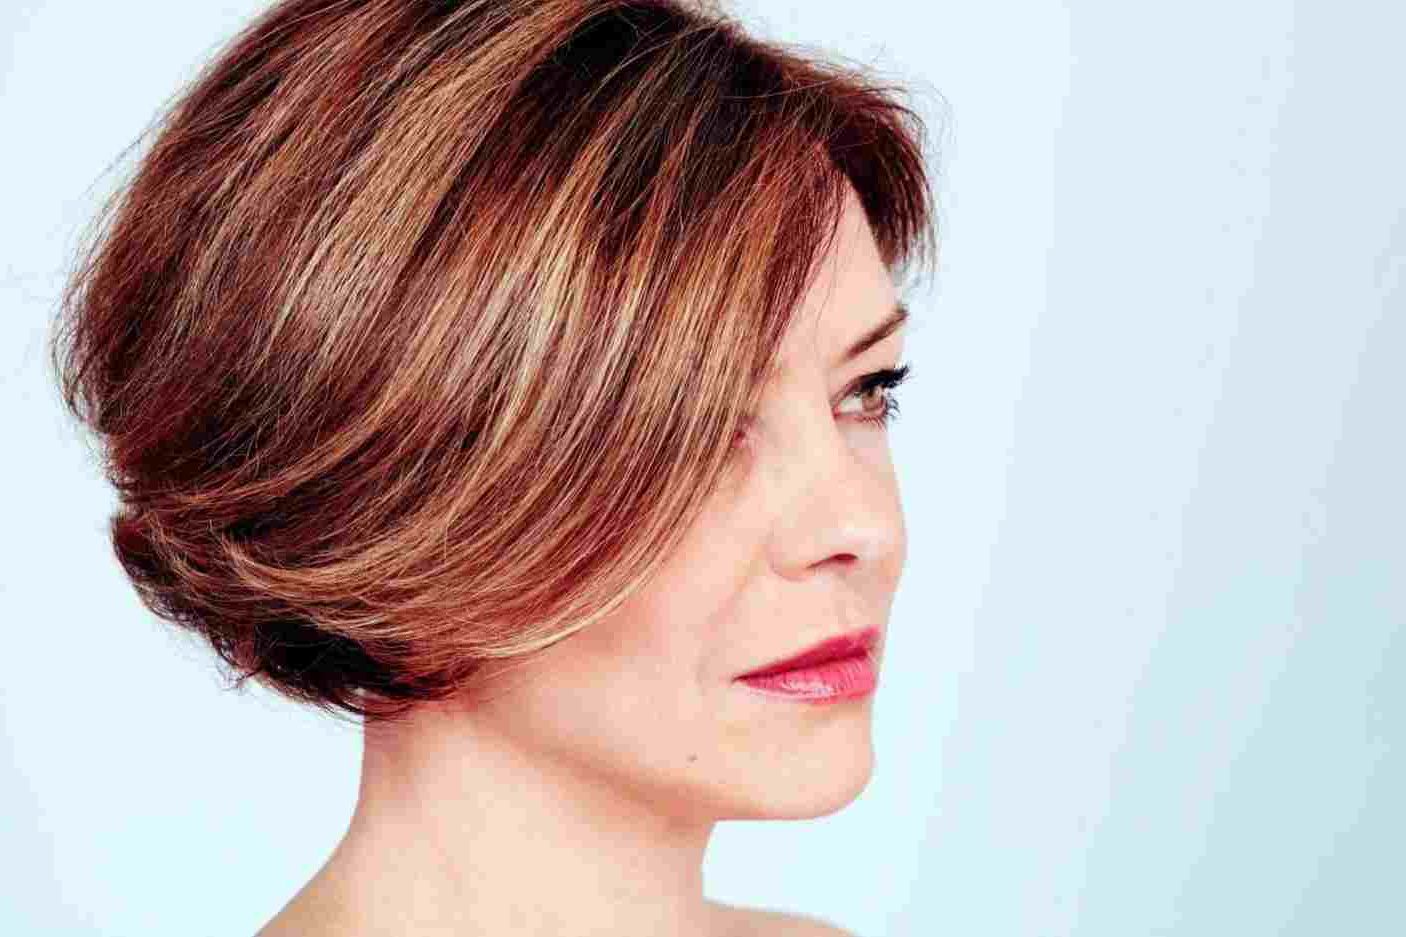 Inspirational Hairstyles Women Over Thin Rhmenshairstyleus Inside Short Hairstyles For Women Over 40 With Fine Hair (View 24 of 25)